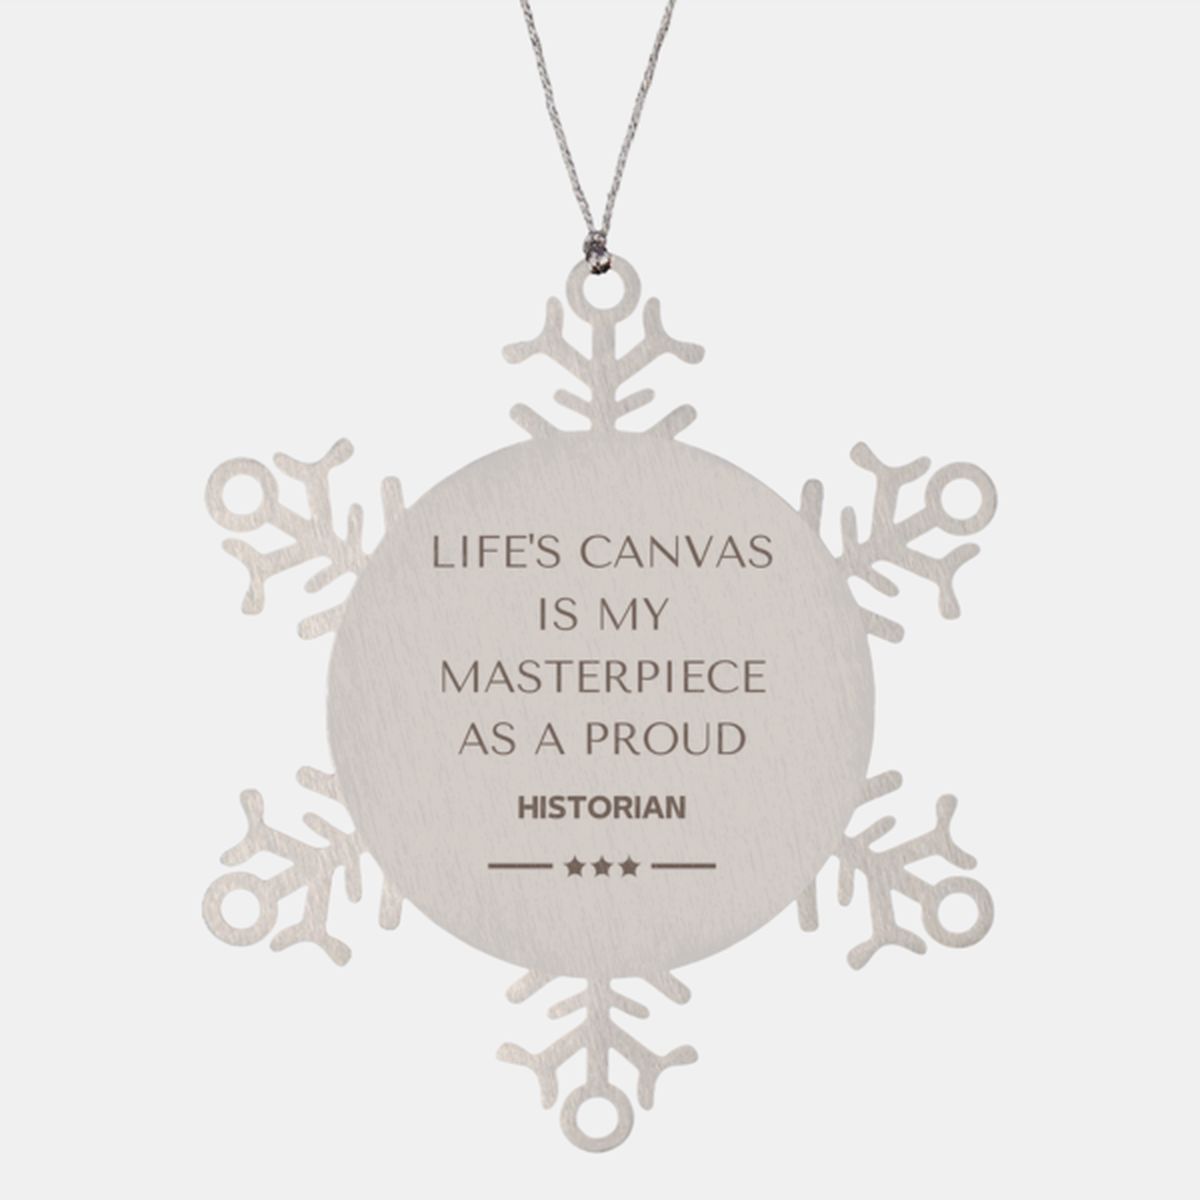 Proud Historian Gifts, Life's canvas is my masterpiece, Epic Birthday Christmas Unique Snowflake Ornament For Historian, Coworkers, Men, Women, Friends